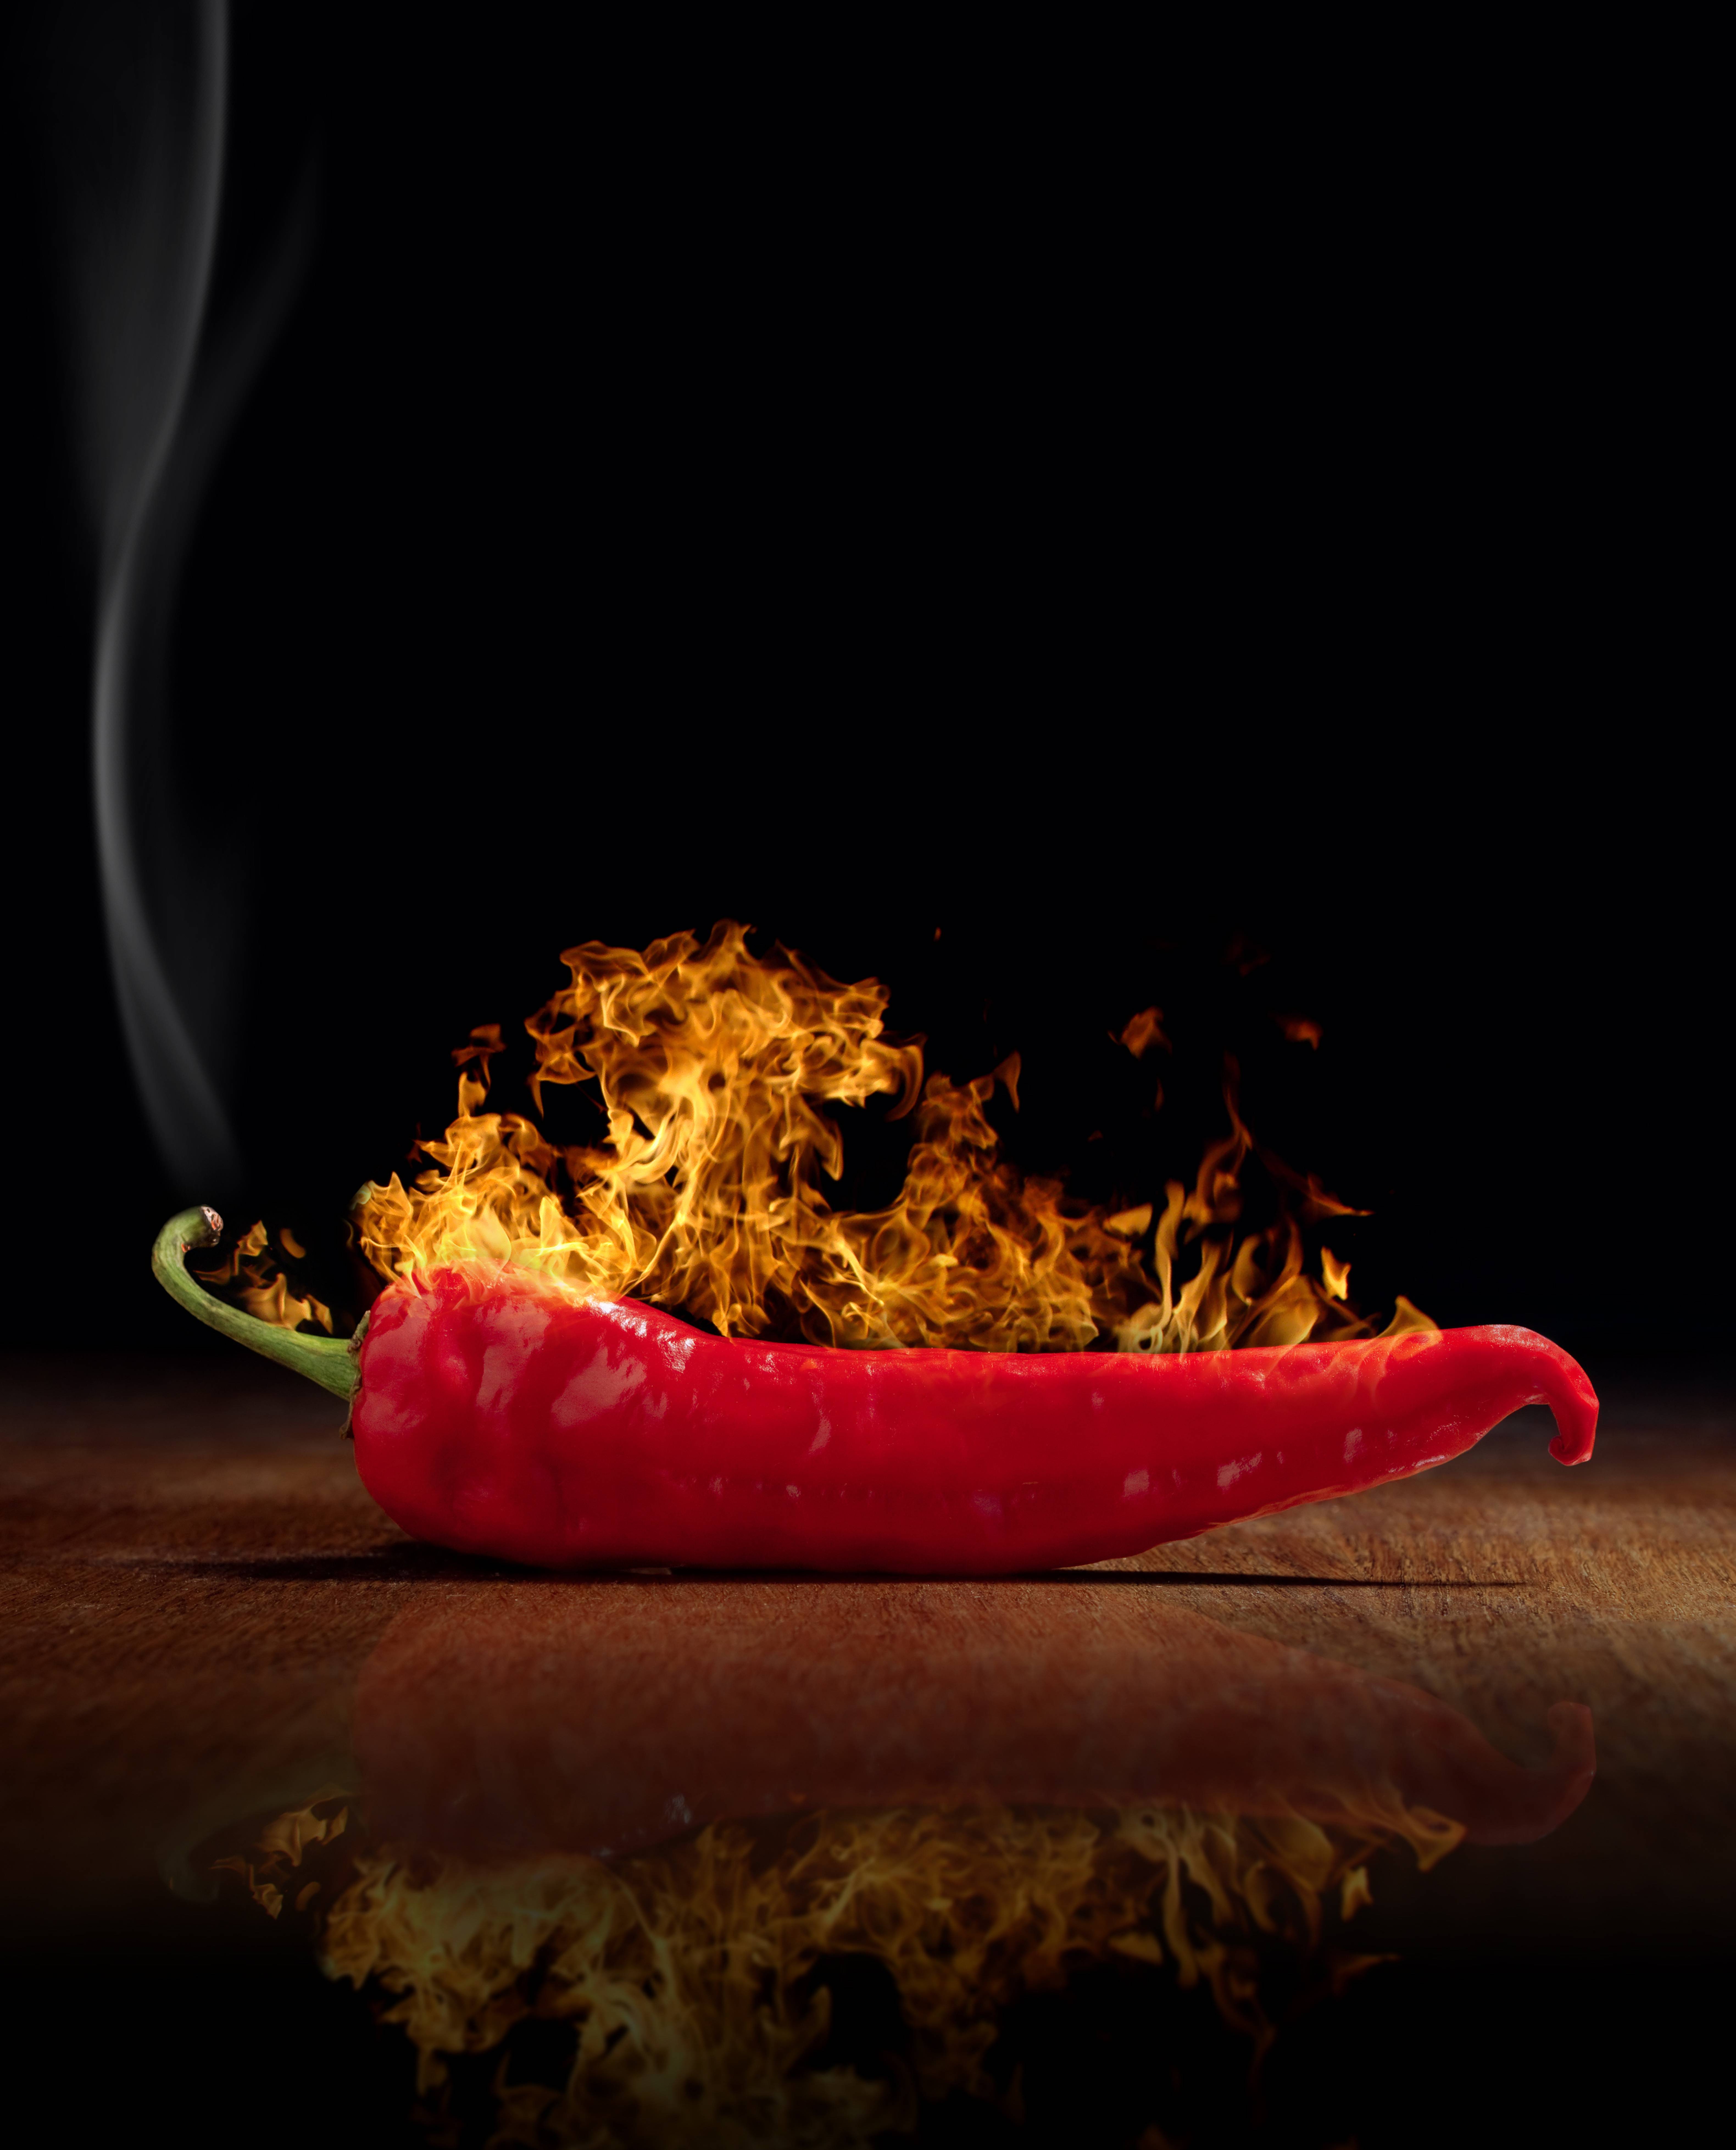 Wallpapers pepper red food on the desktop